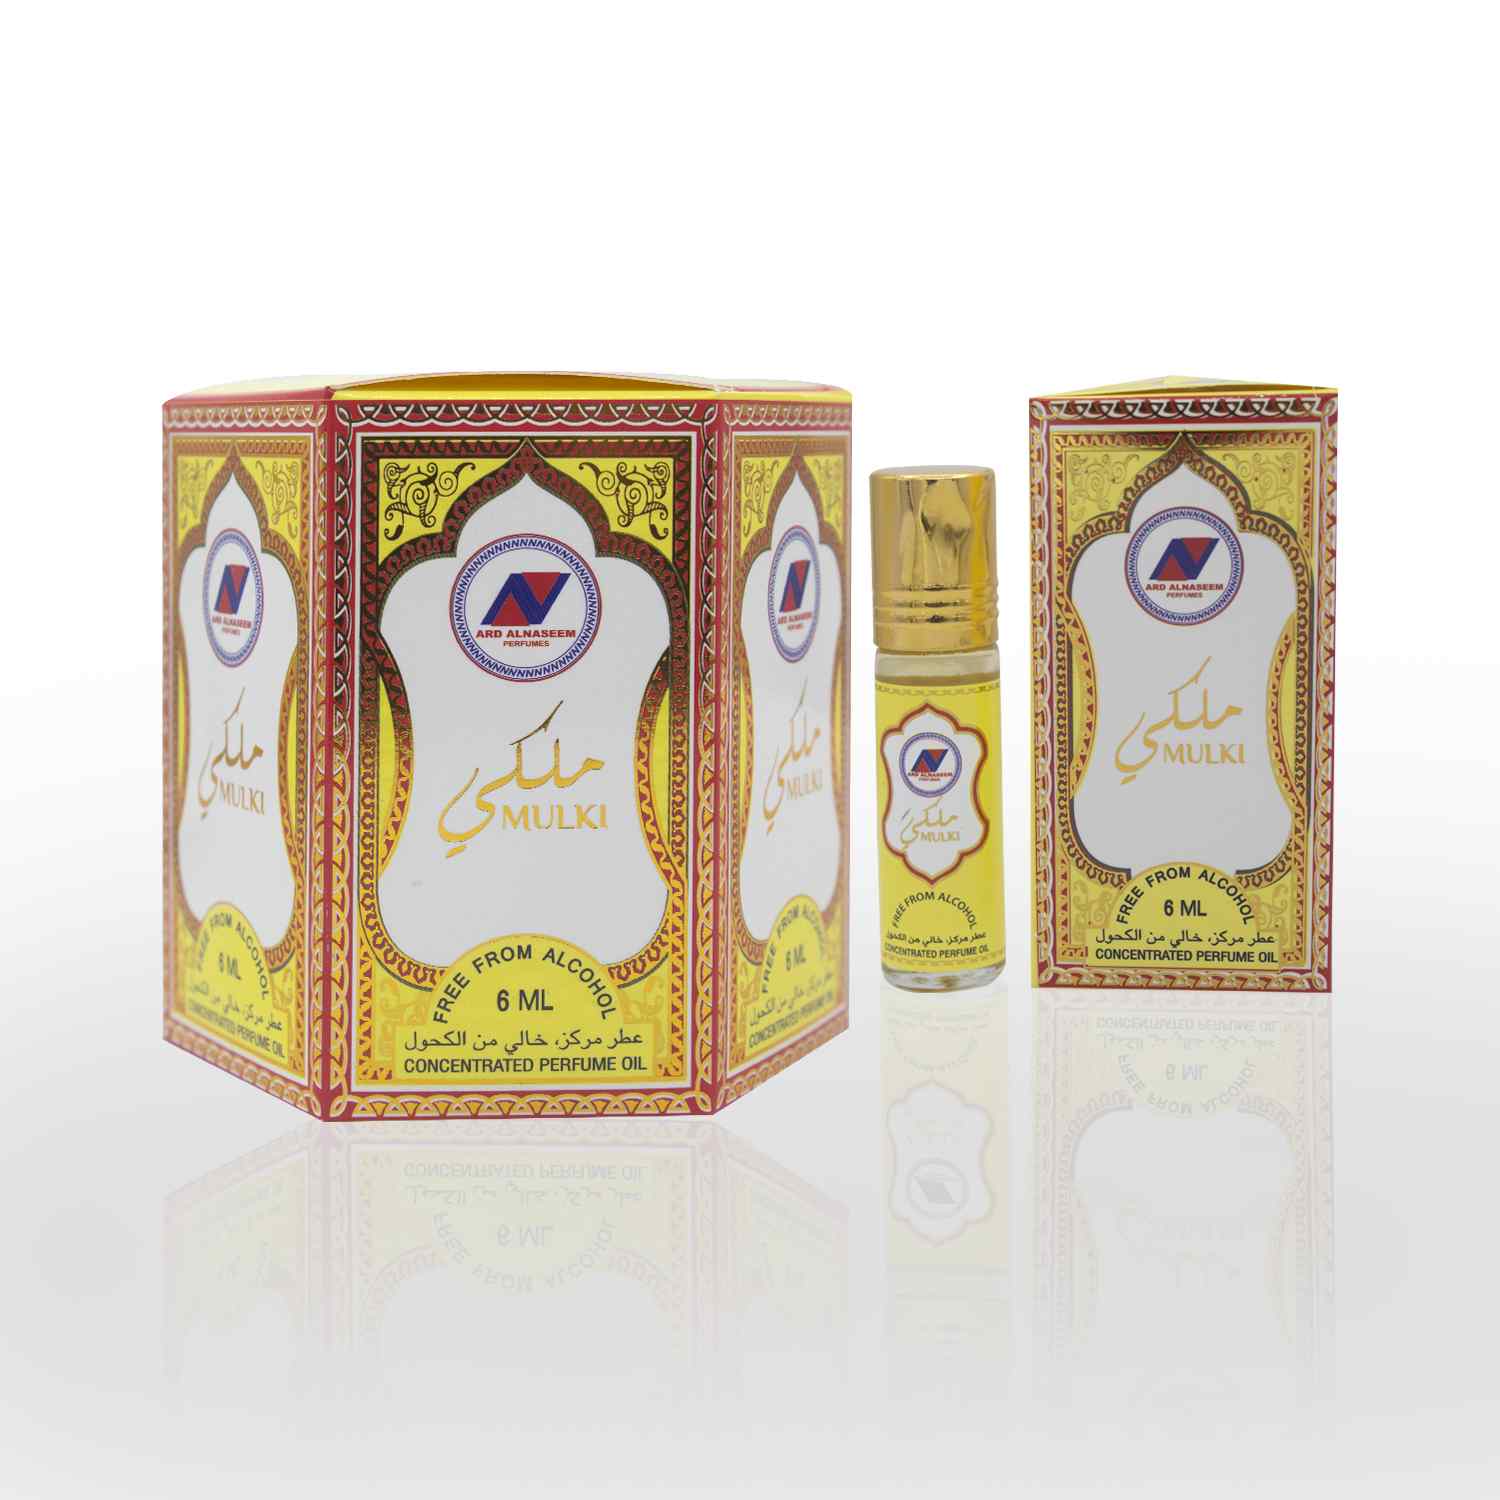 Mulki 6ml Attar is a concentered perfume oil, free from Alcohol. It is a product of ARD perfumes. Made in UAE